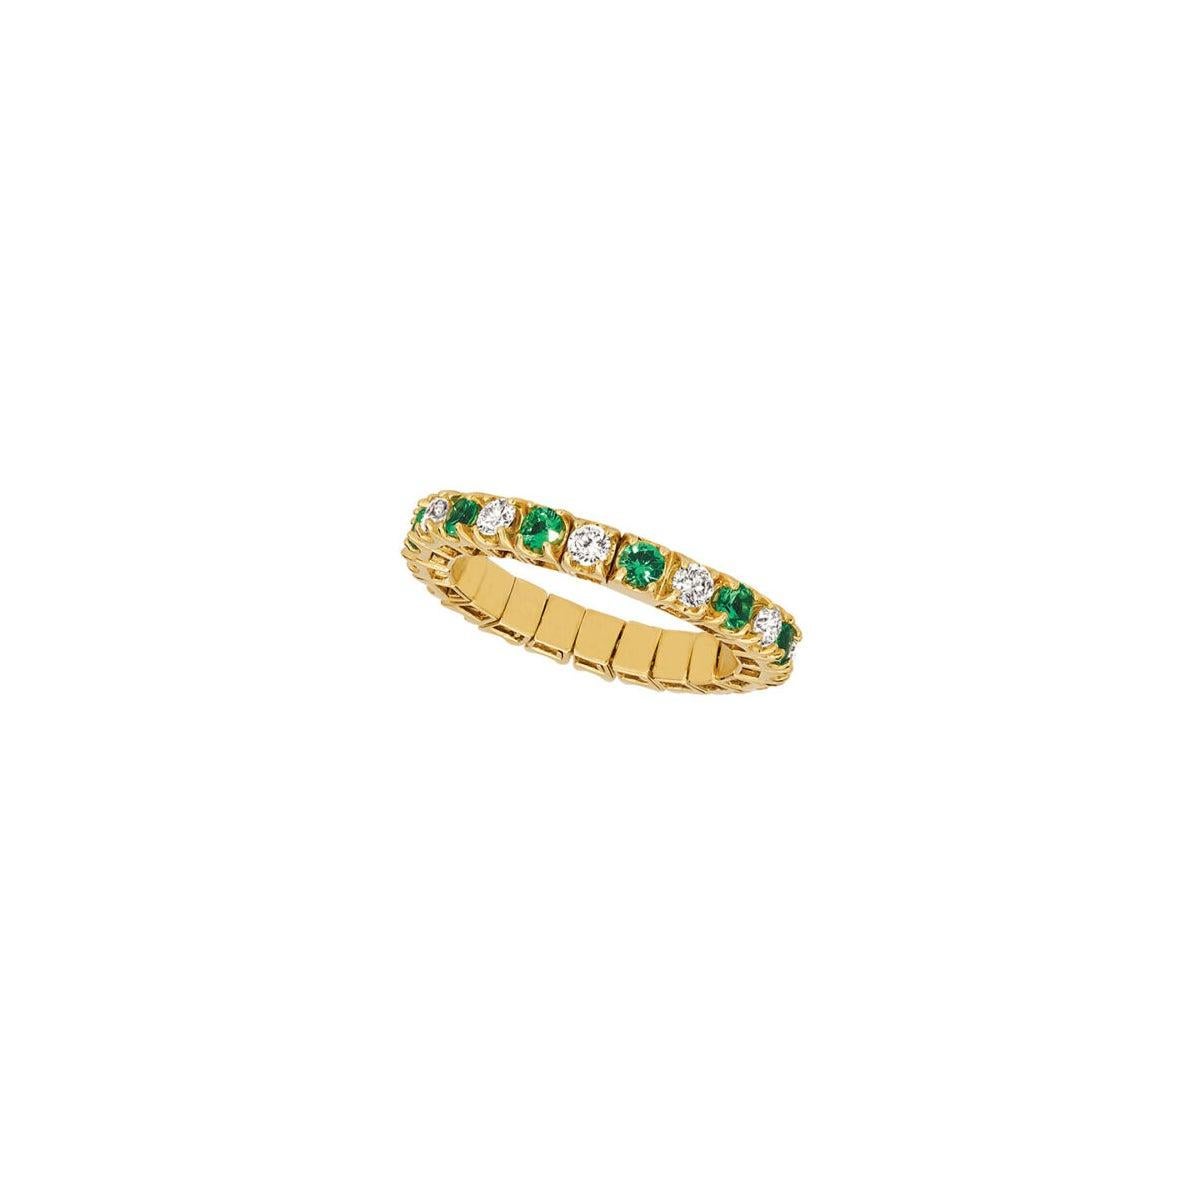 For Sale:  1.55 Carat Natural Diamond & Emerald Stretch Eternity Band Ring 14k Yellow Gold 2